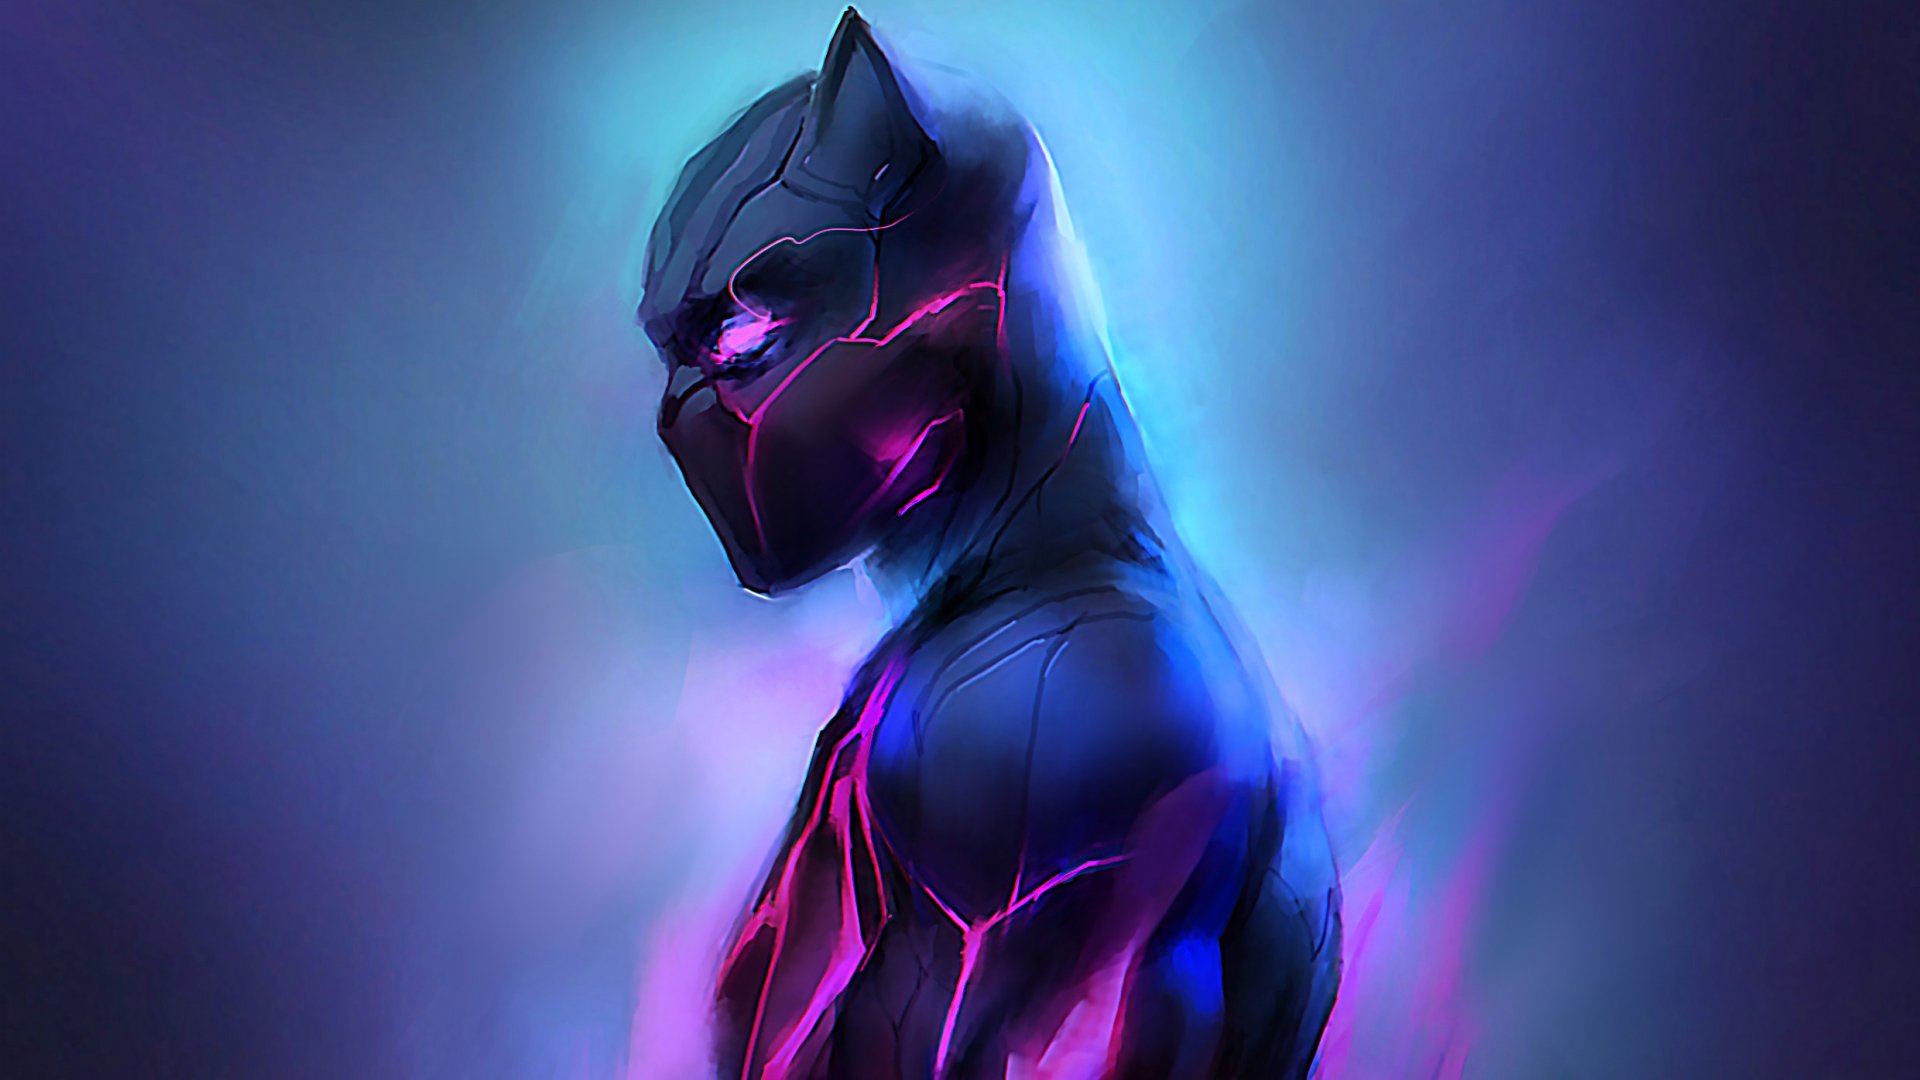 Black Panther HD desktop wallpaper featuring the iconic Marvel Comics character in a striking pose.